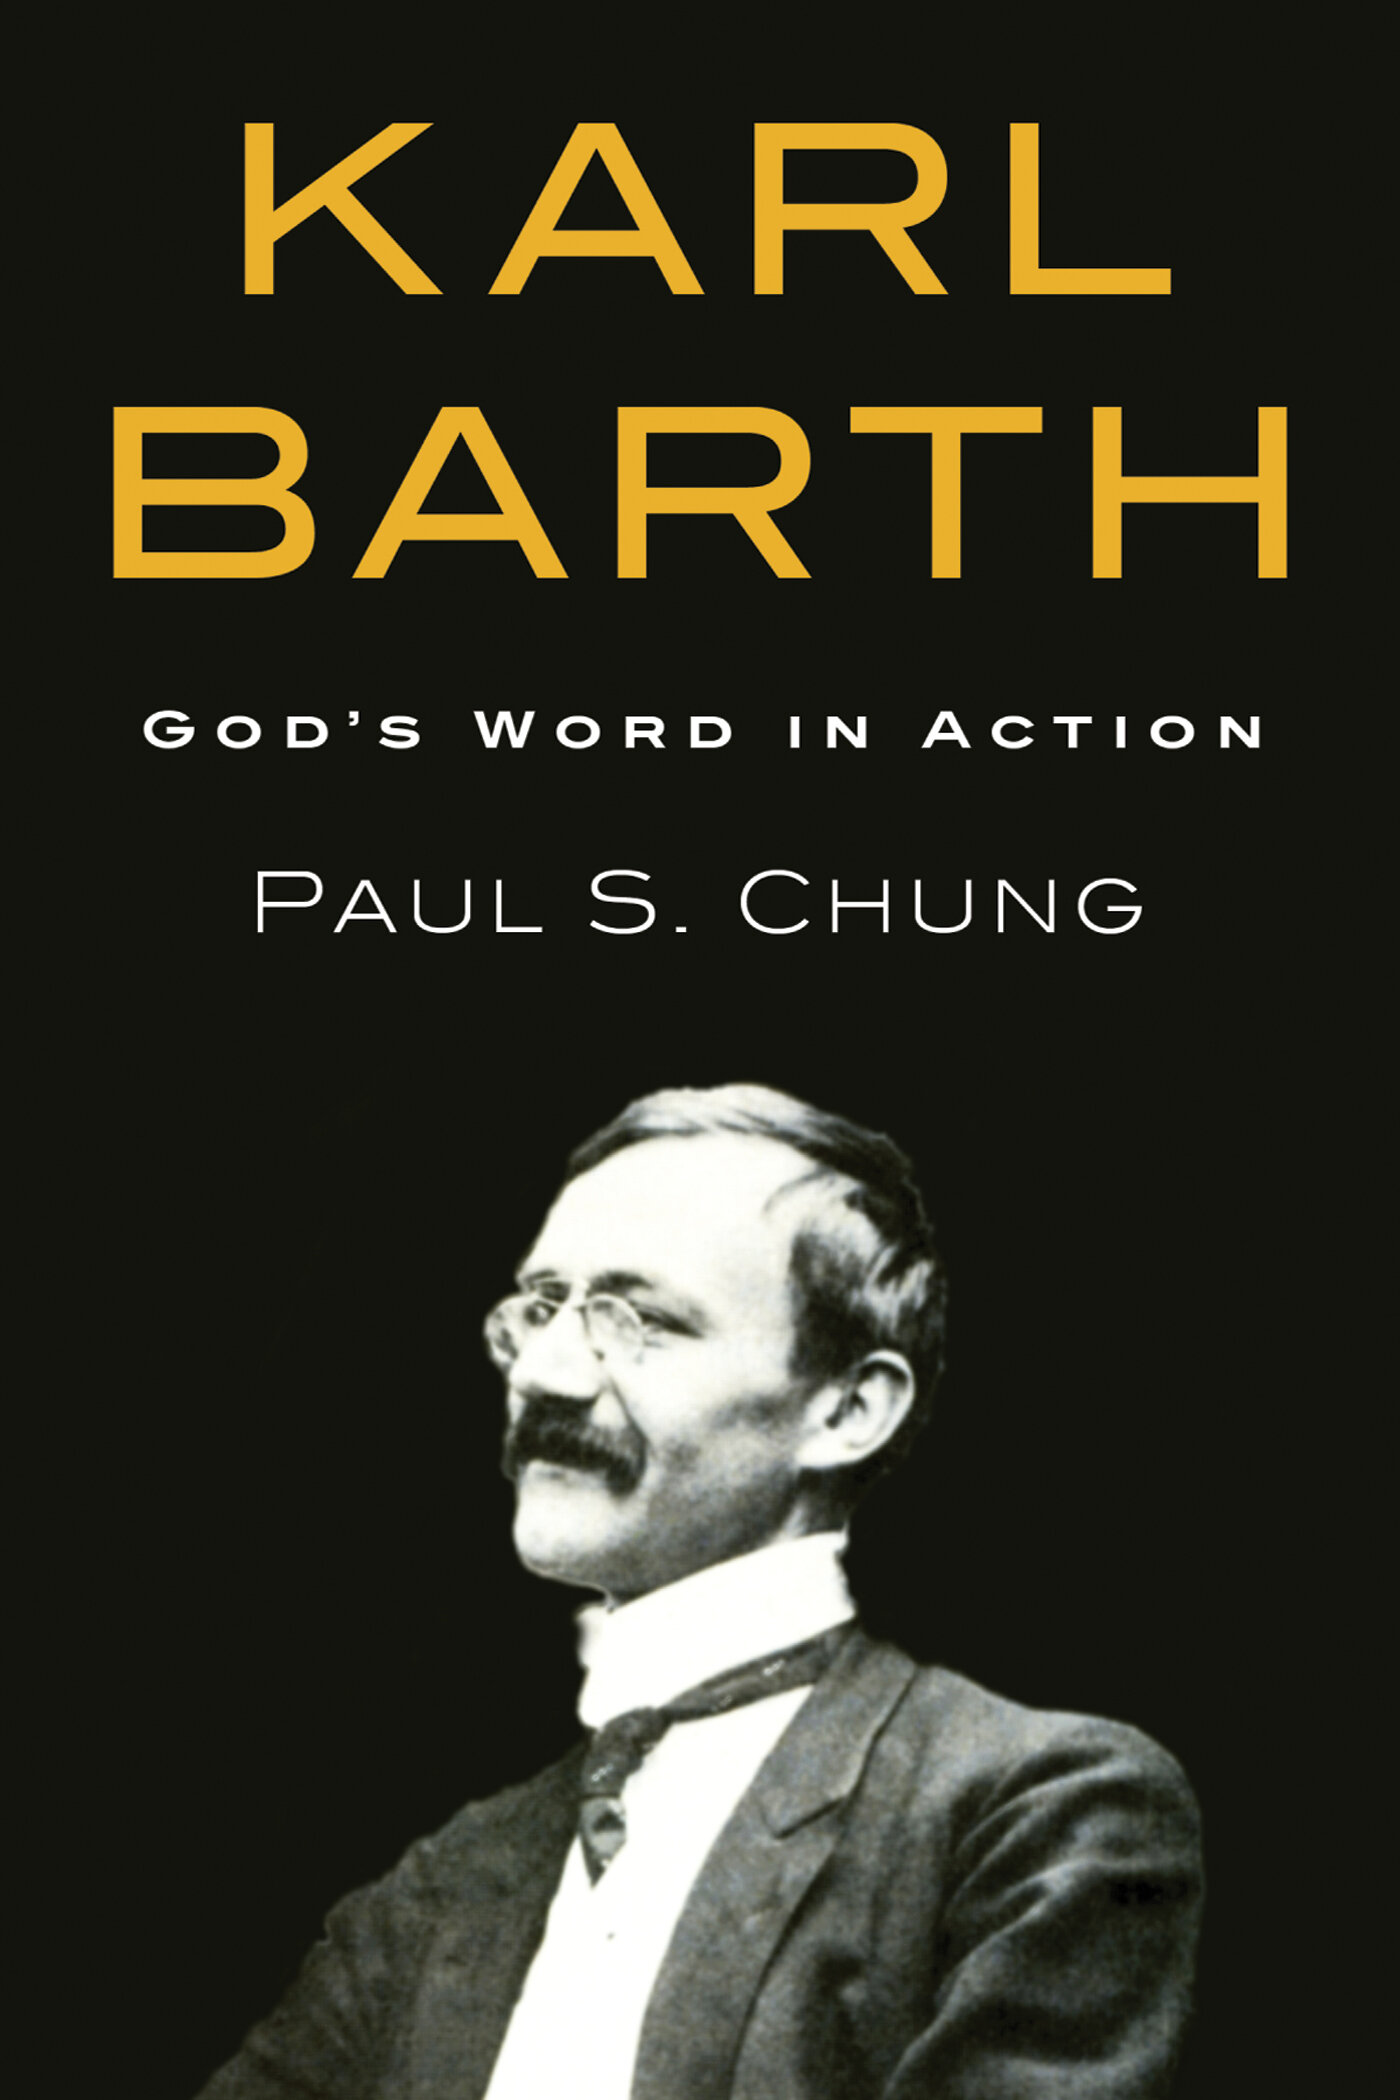 Karl Barth: God’s Word in Action